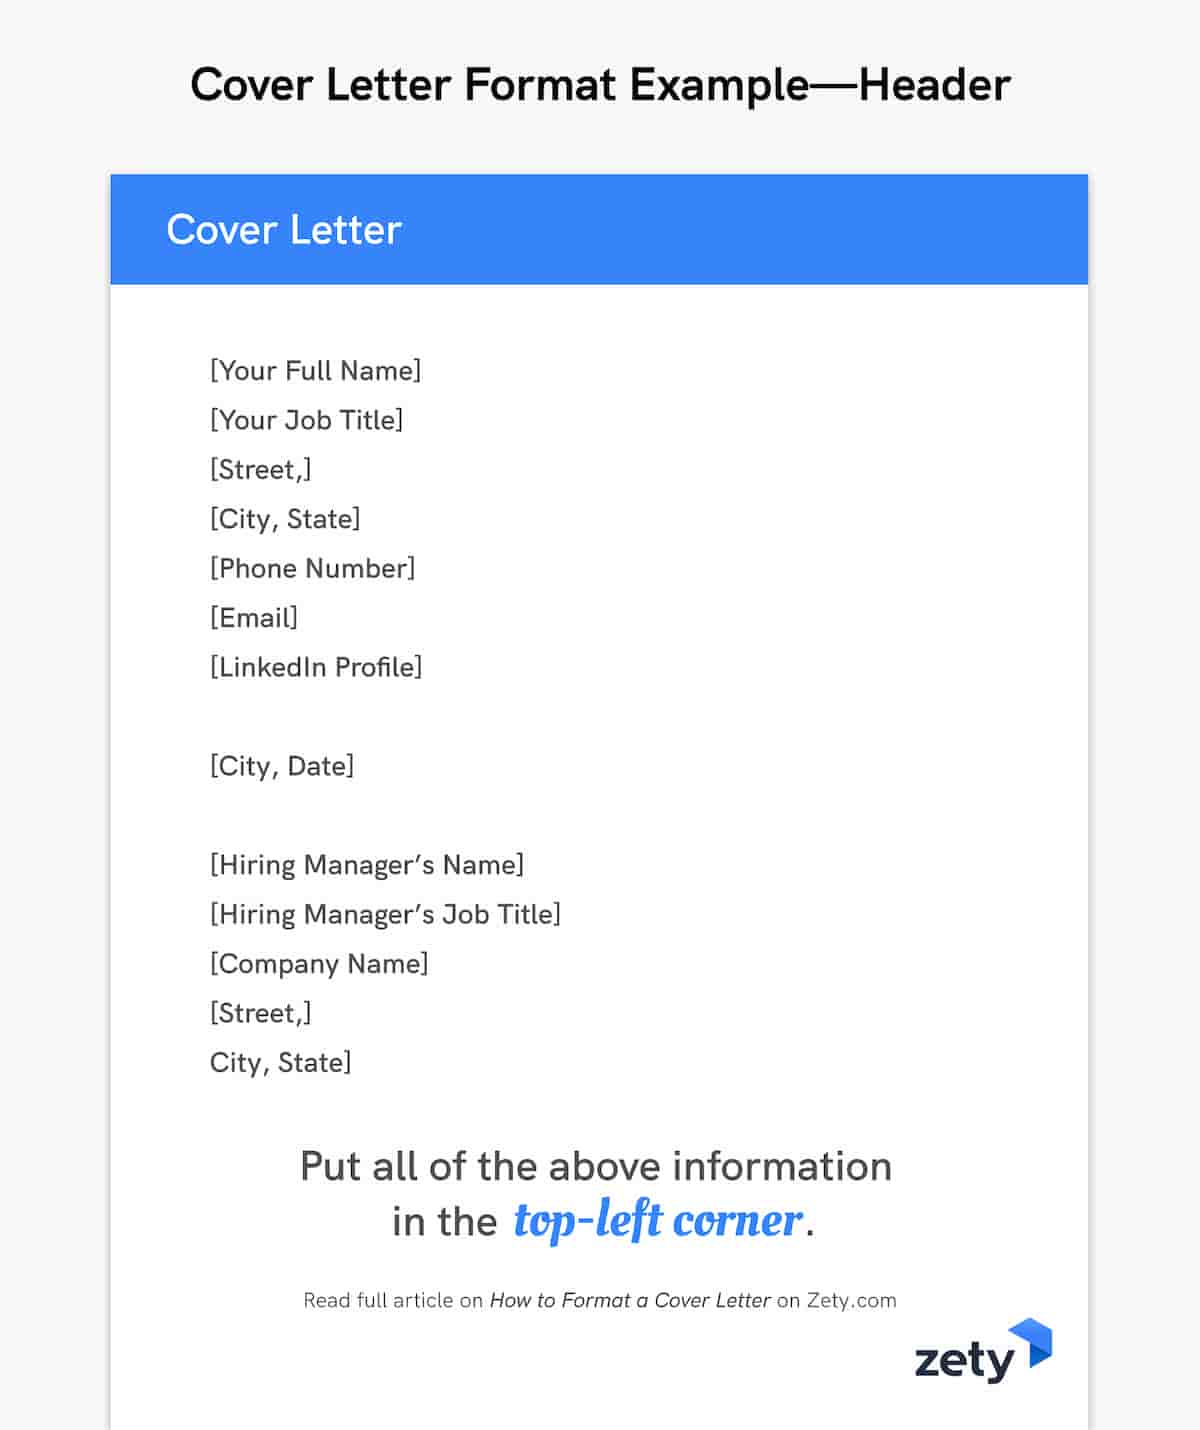 Cover Letter Format Example - Header